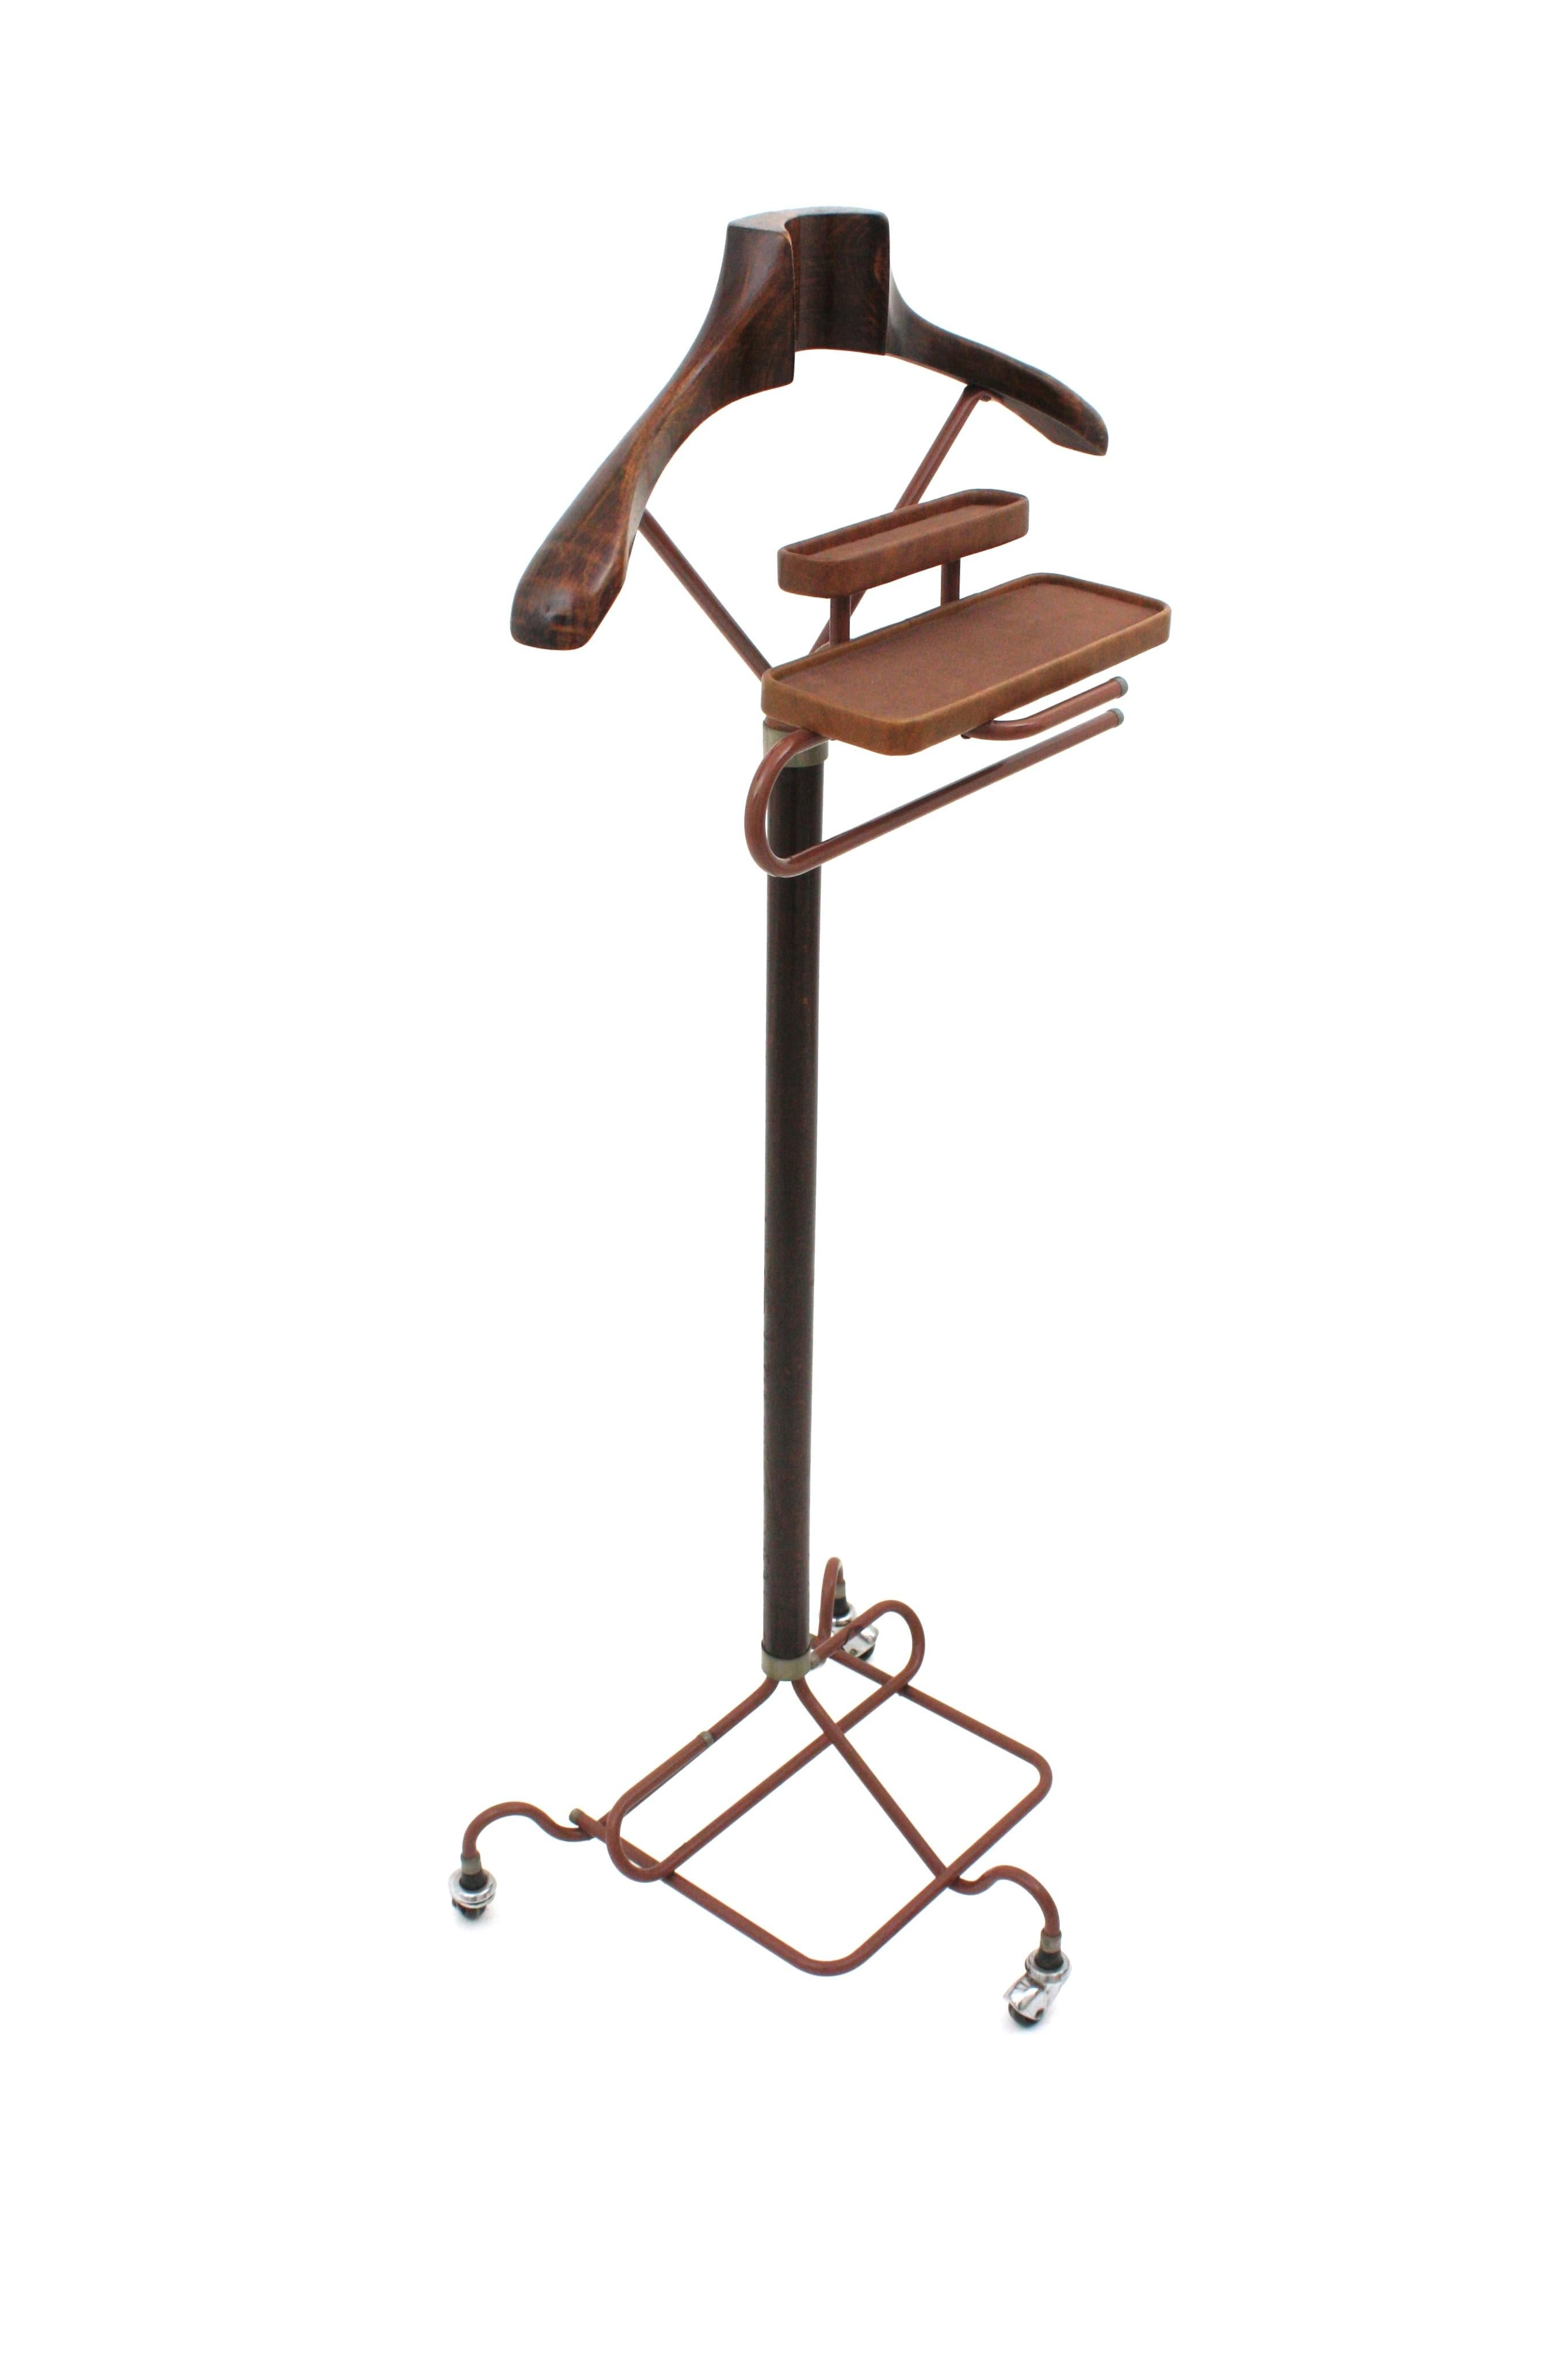 Mid-Century Modern Italian Beech Wood and Acrylic Valet Stand Dressboy, 1960s For Sale